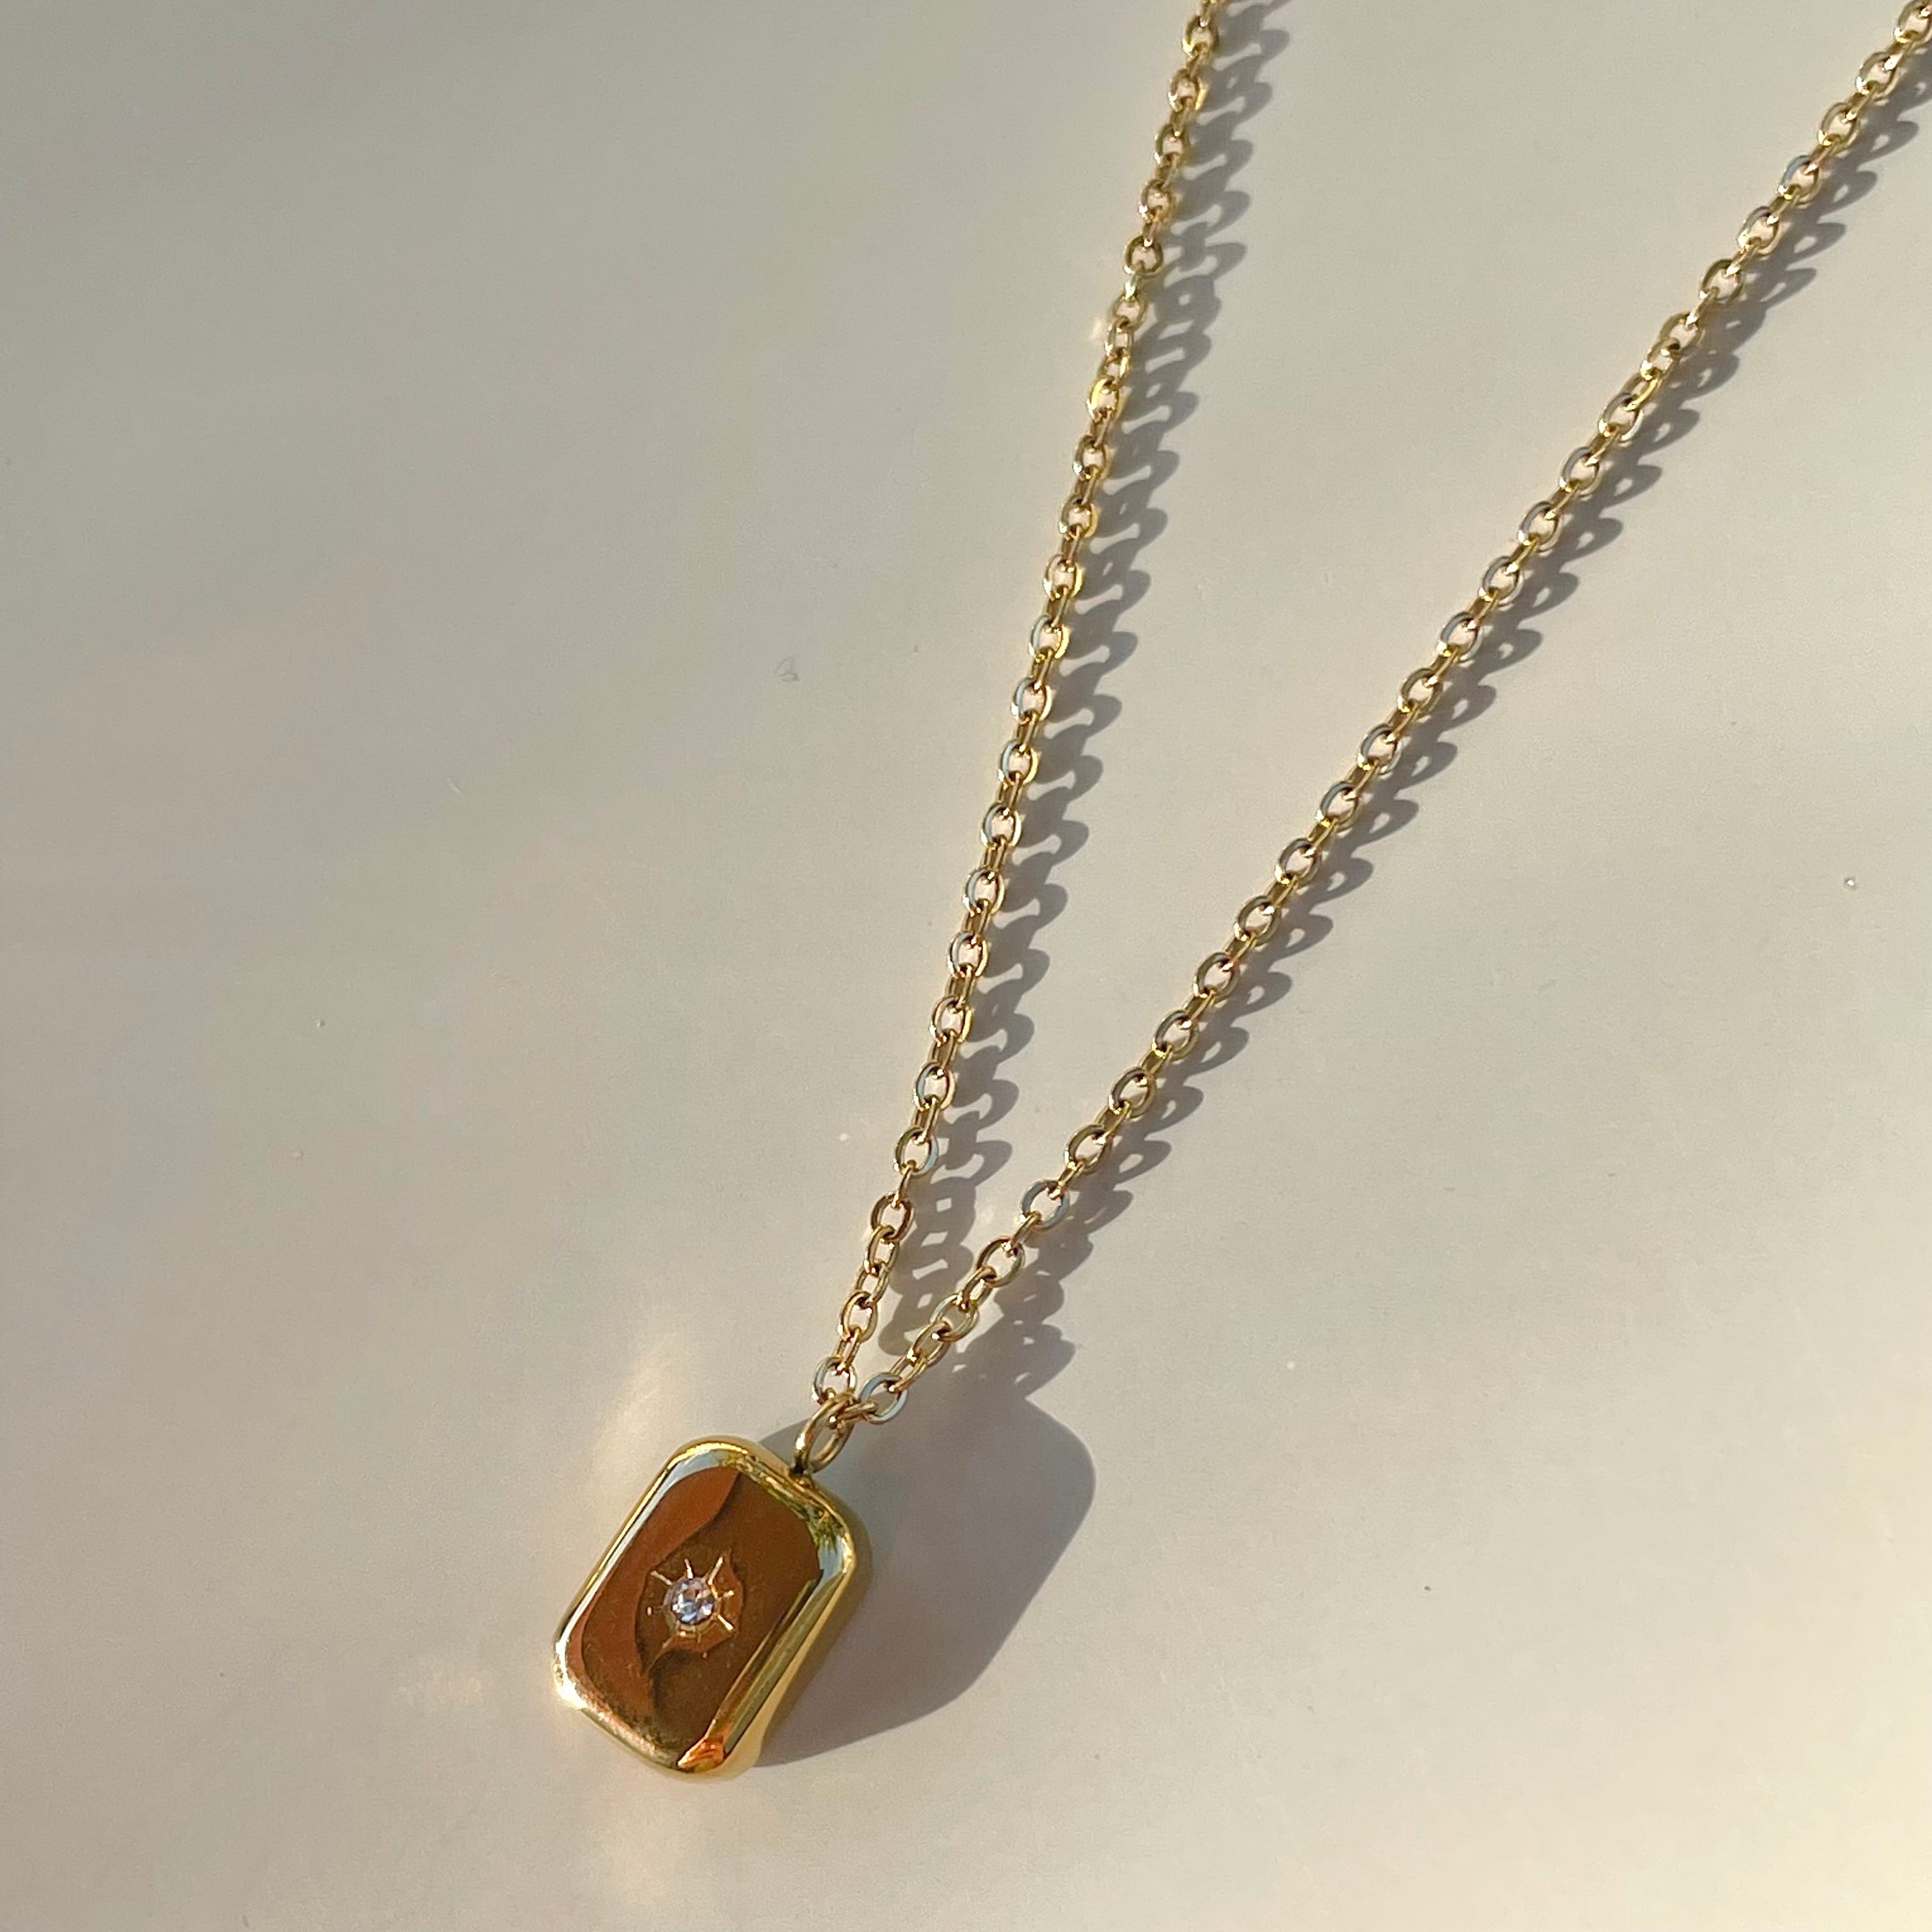 Square rectangle starburst necklaces for women in gold and sterling silver, Sydney Australia